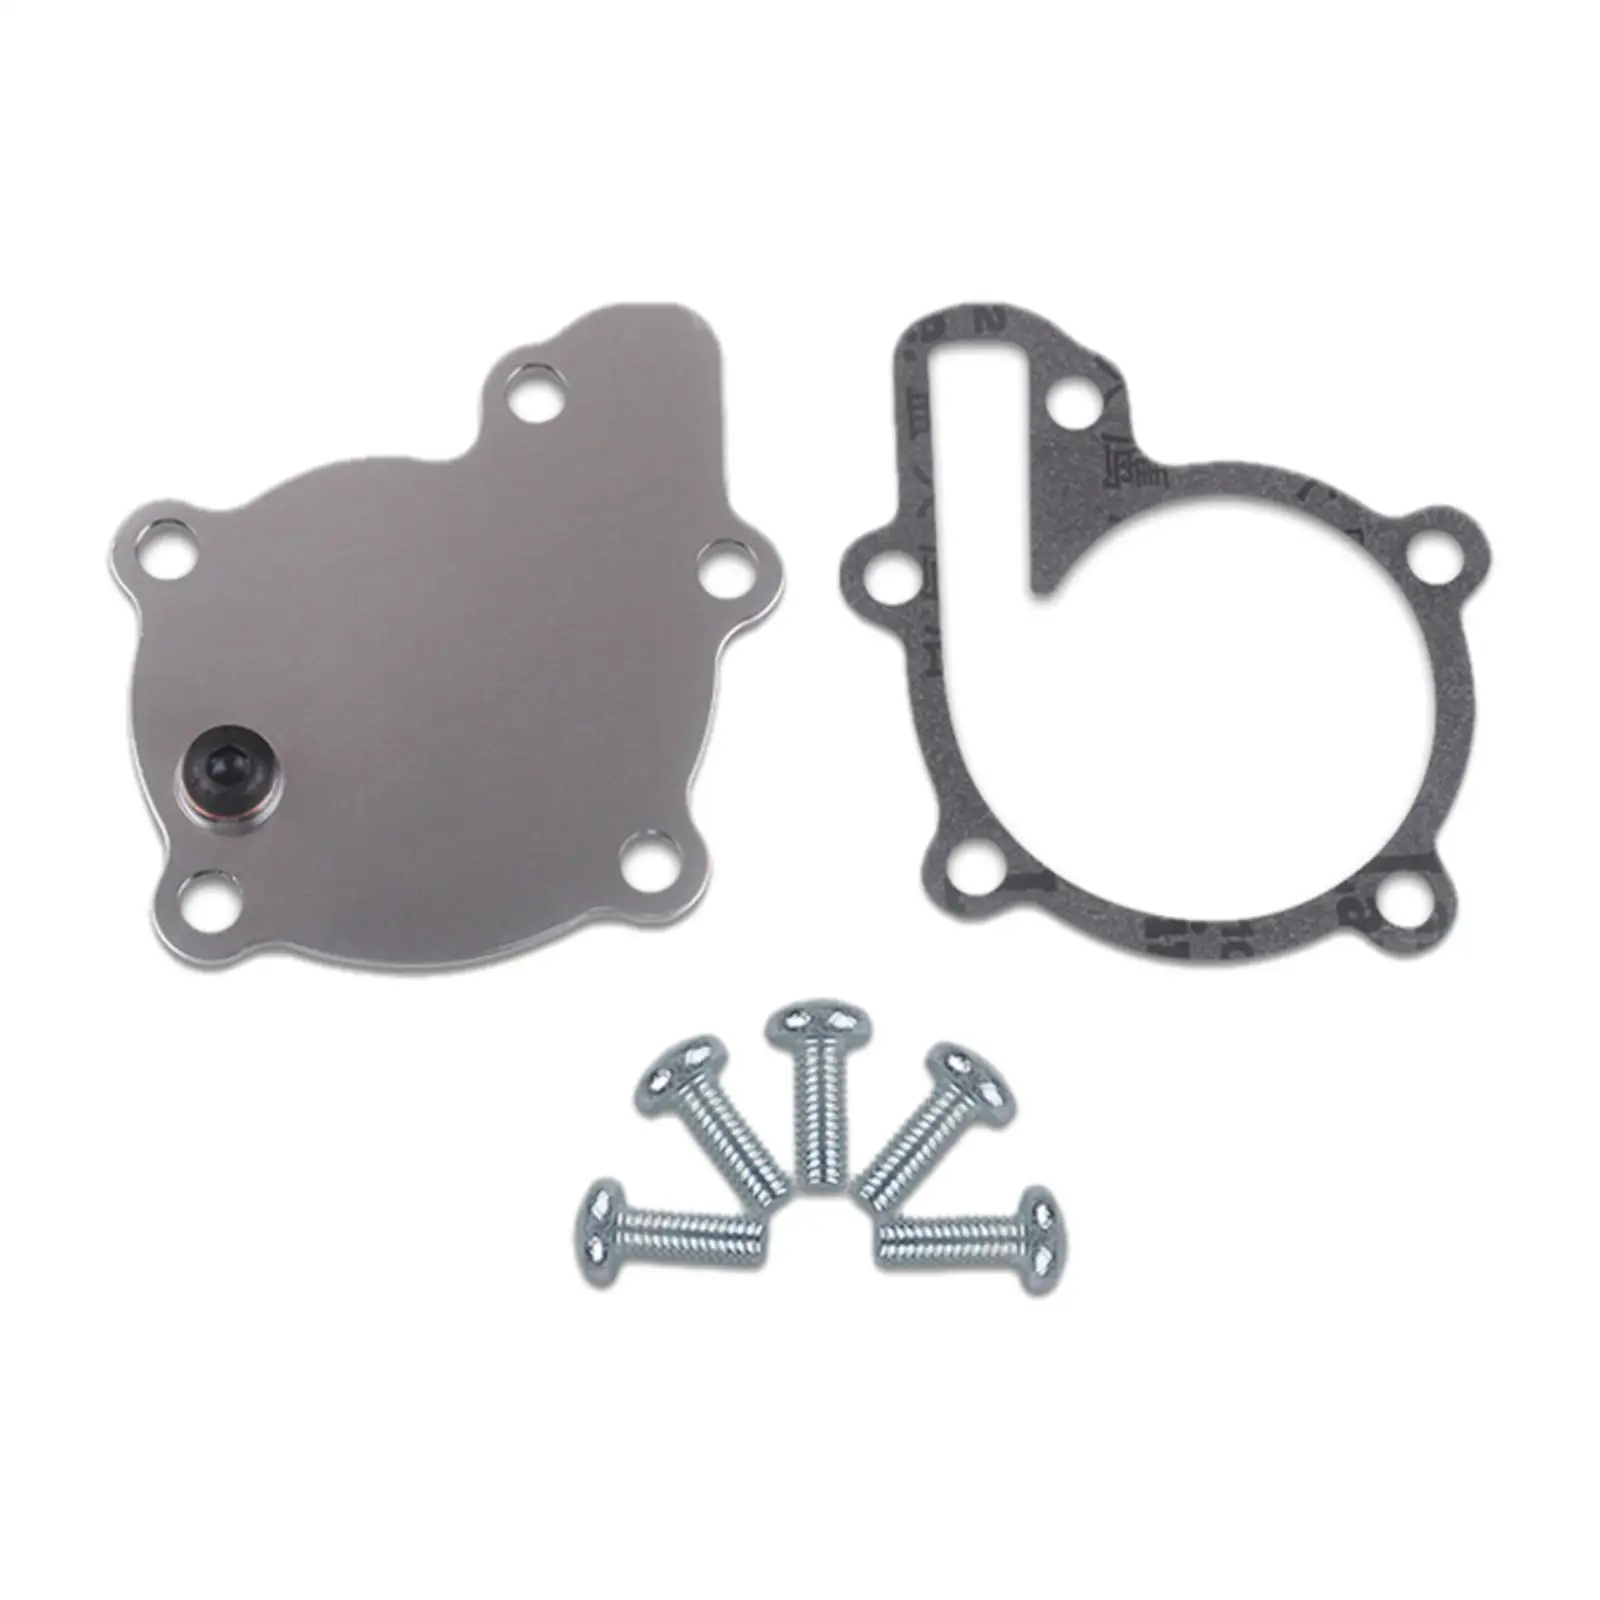 Practical  Cover Housing W/ Gasket for Banshee 350 1987-2006 Parts  Replacement